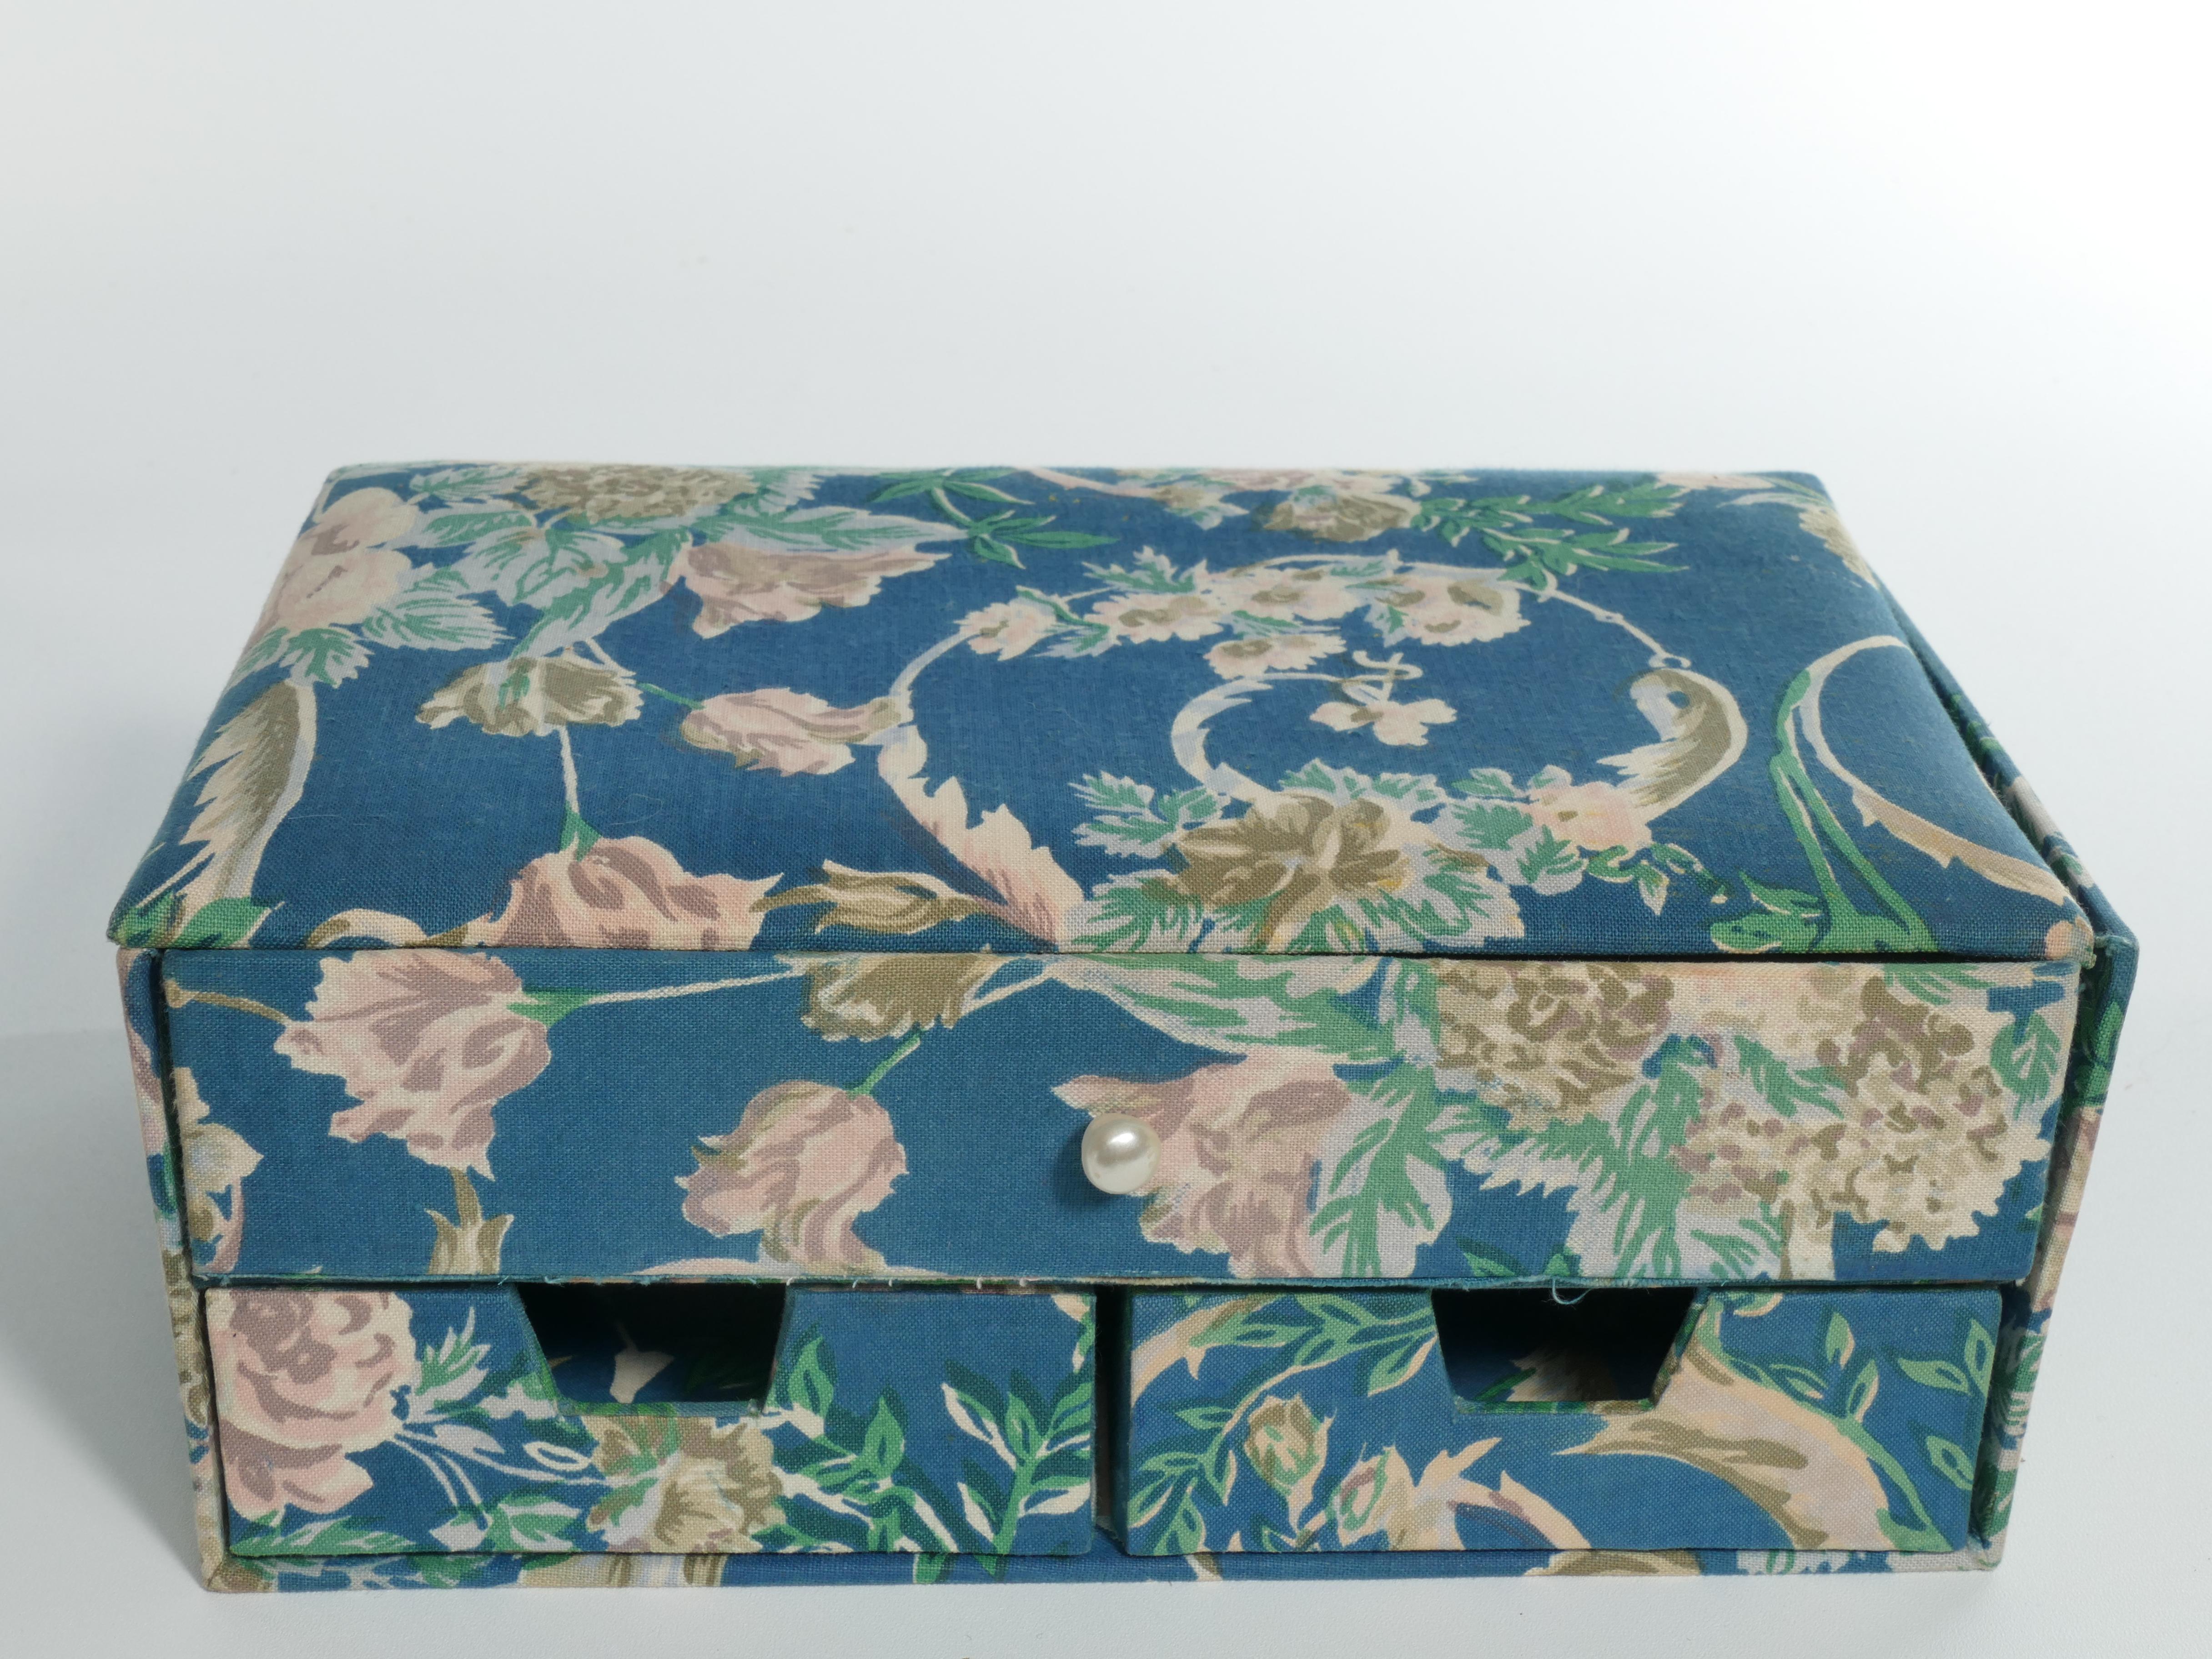 Hand-Crafted Vintage Jewelry Box in Blue Textile With Floral Motifs For Sale